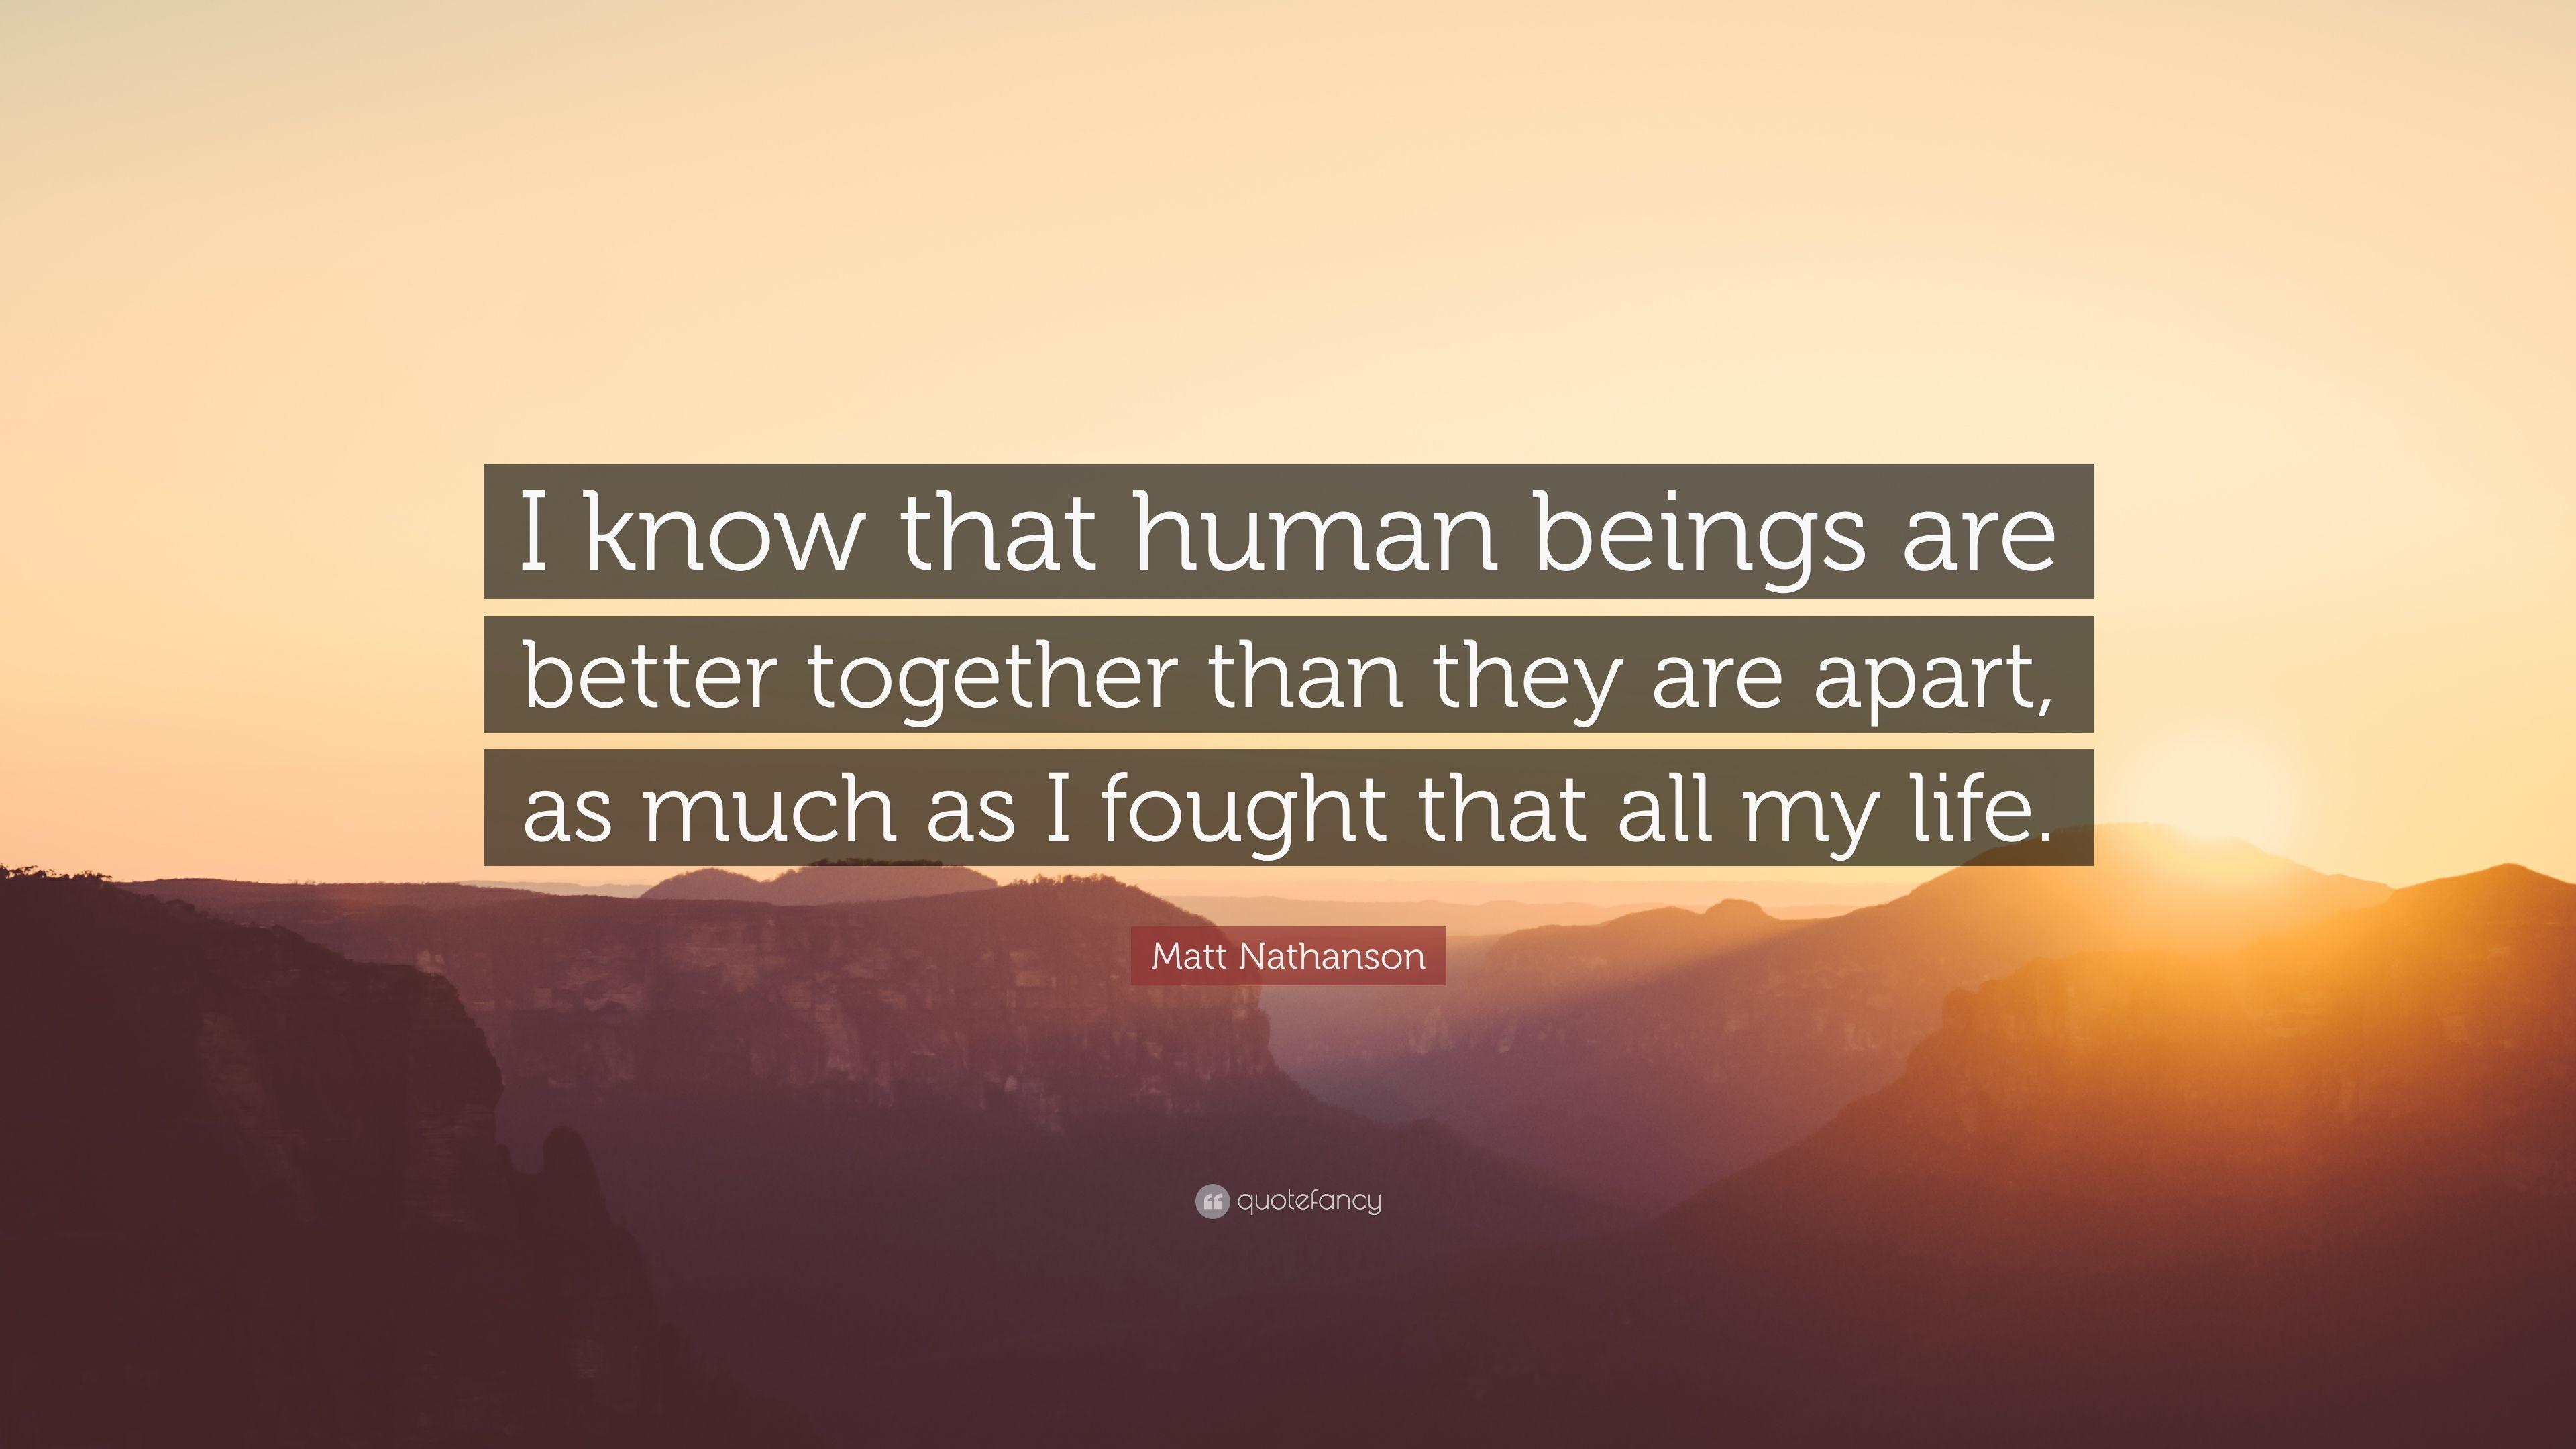 Matt Nathanson Quote: “I know that human beings are better together